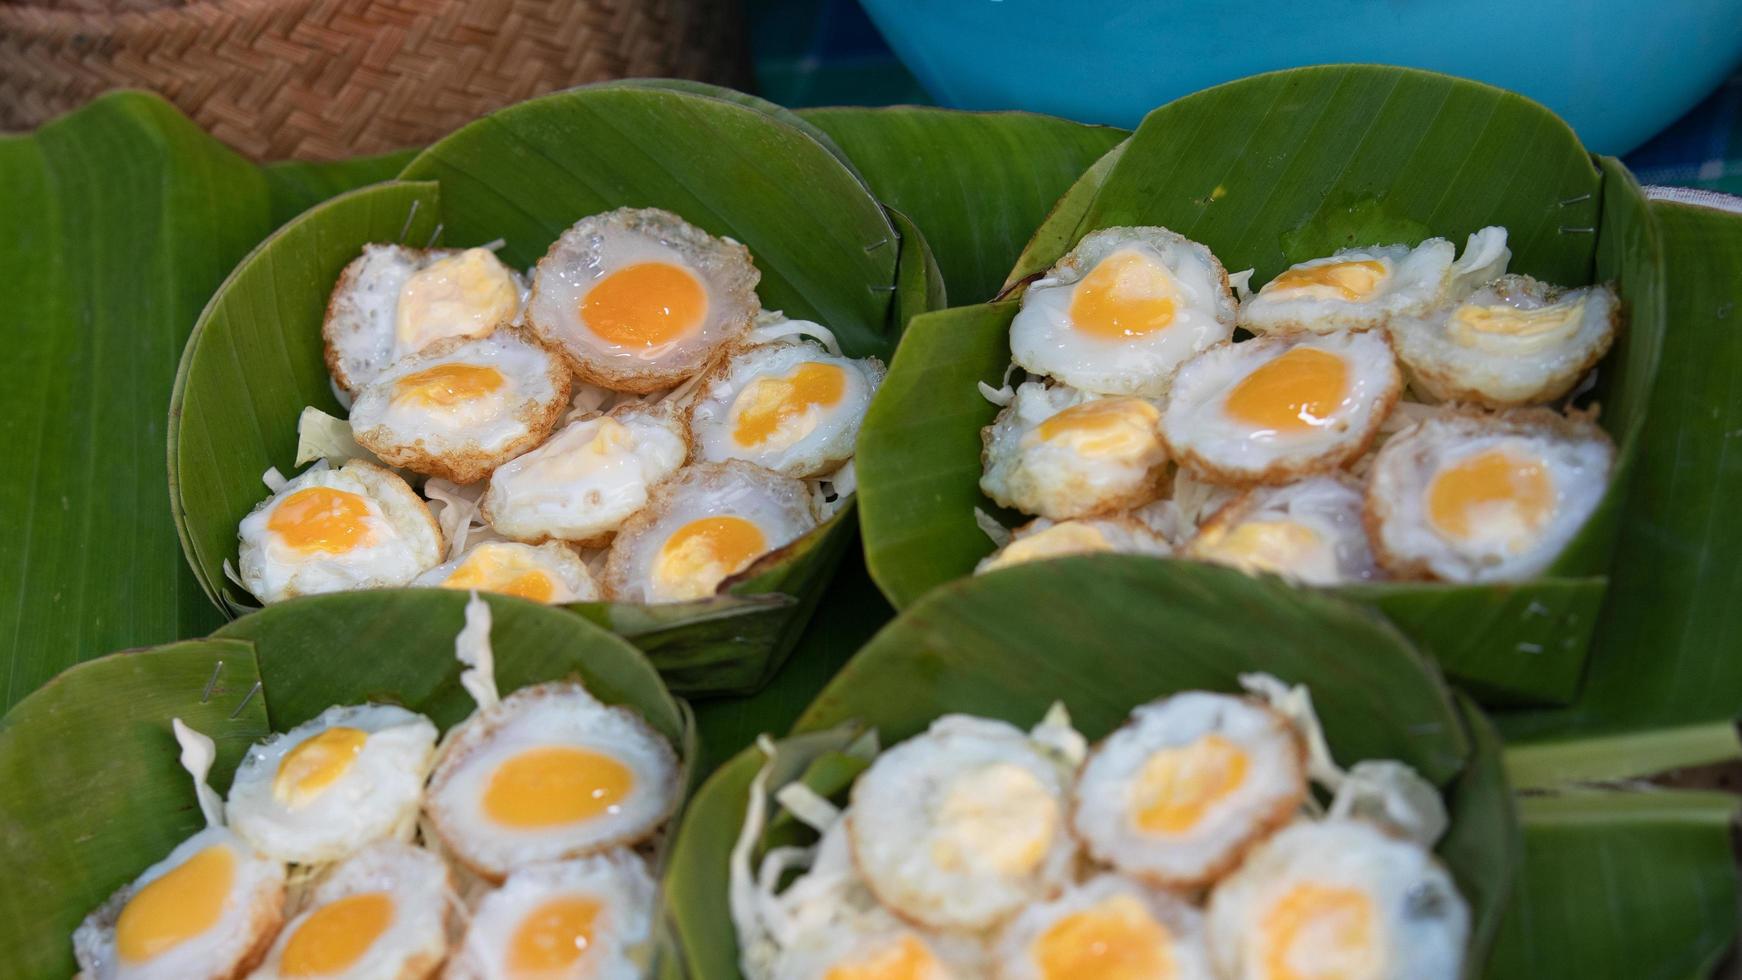 Fried quail eggs in green banana leaves krathong. Thai street food popular to eat with pepper and soy sauce photo